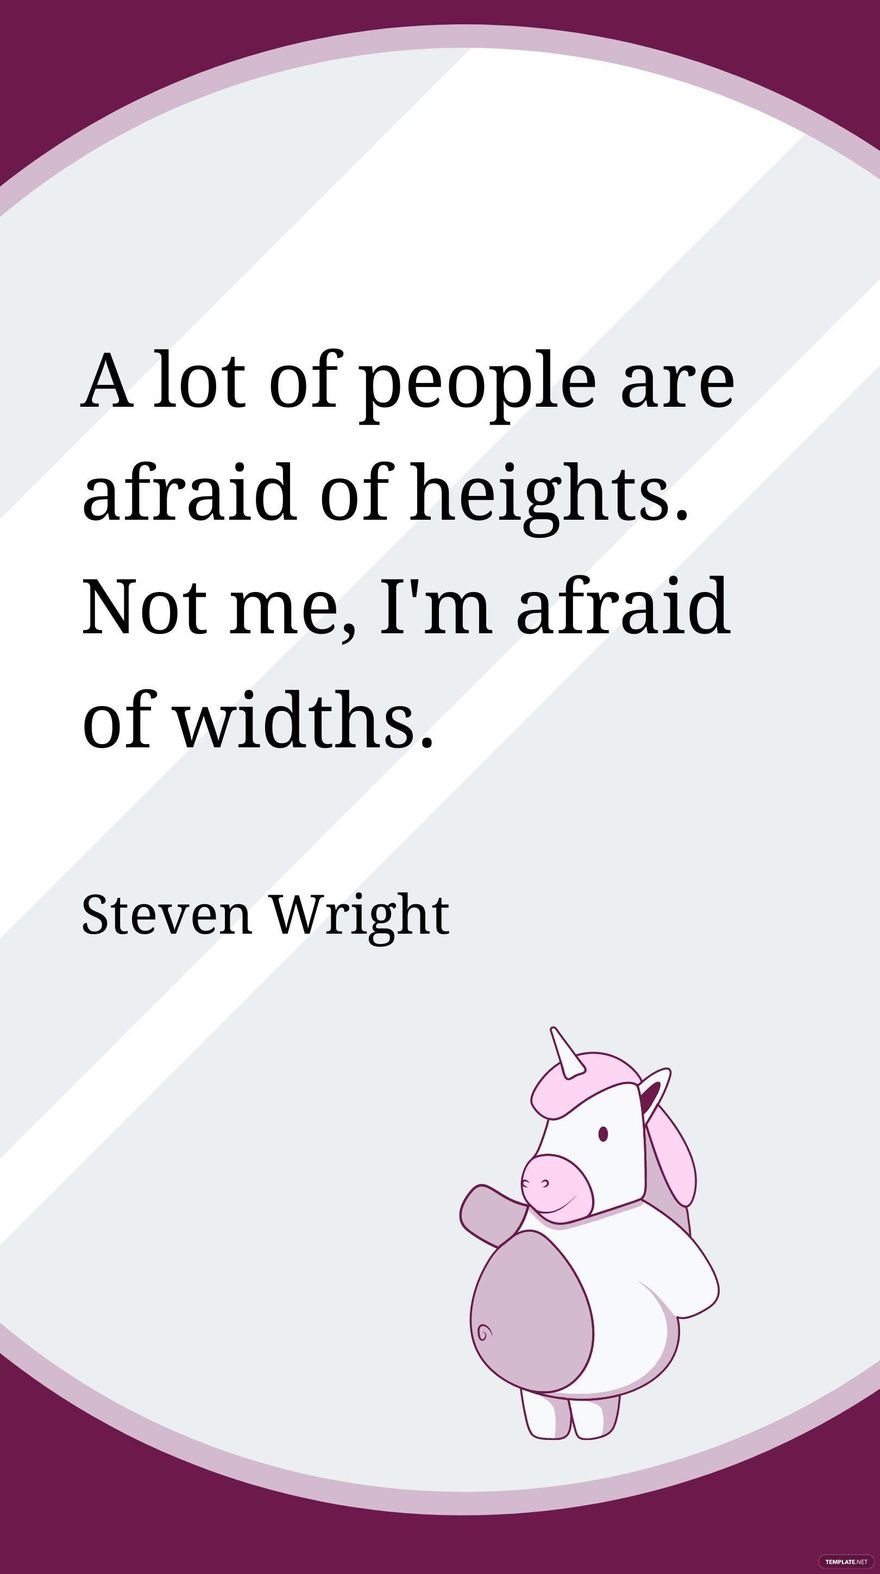 Free Steven Wright - A lot of people are afraid of heights. Not me, I'm afraid of widths. in JPG